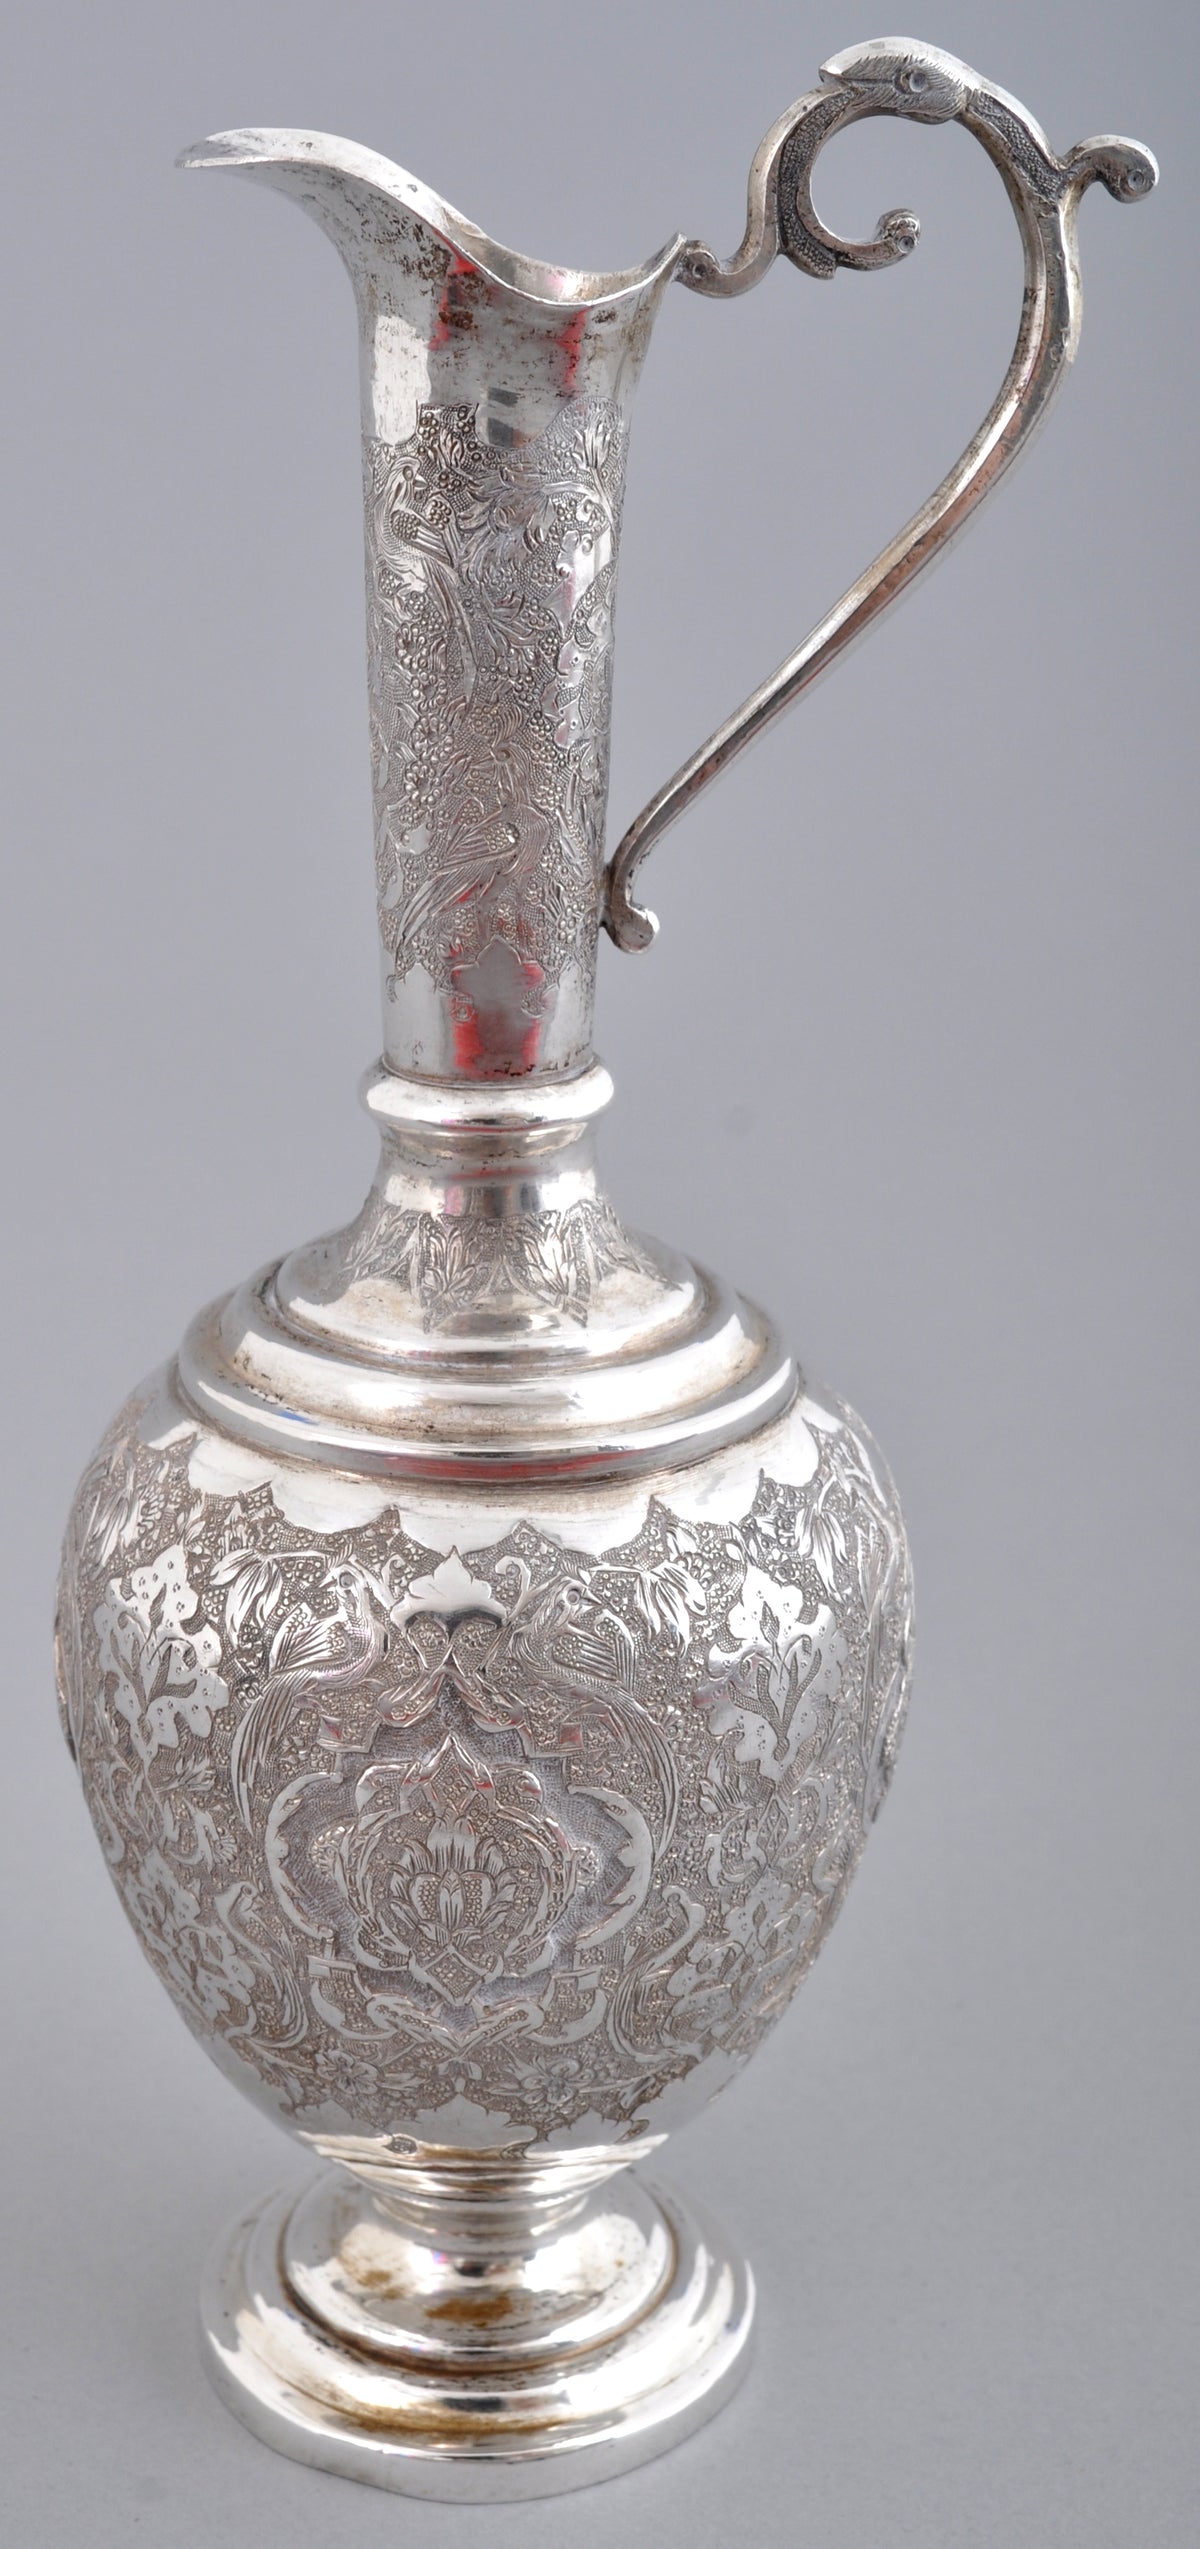 Antique Islamic Persian Sterling Silver Engraved Ewer and Goblet Set, Circa 1920